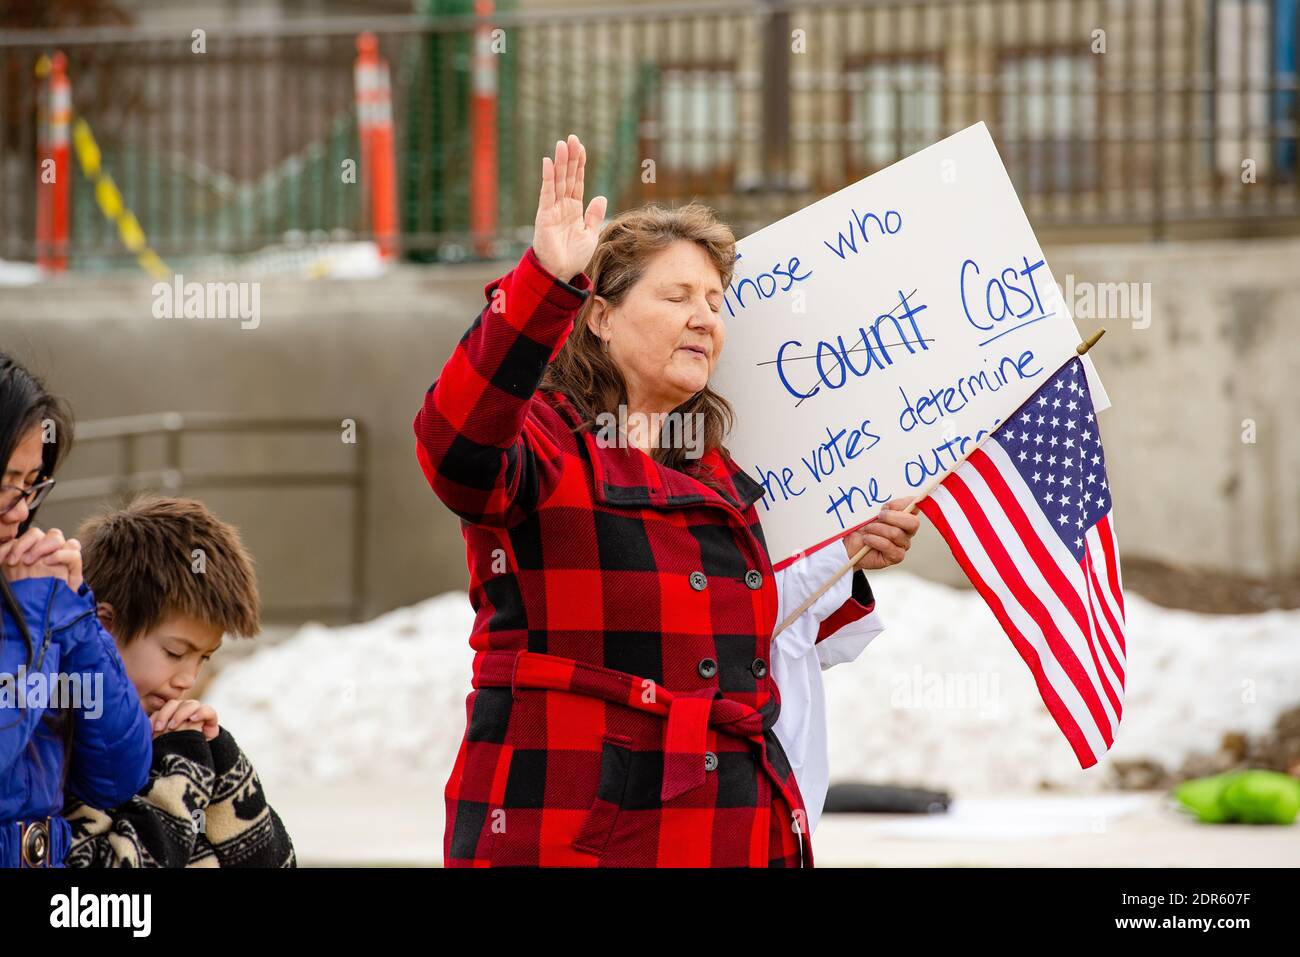 Helena, Montana / Nov 7, 2020: Woman and children praying raising hand at Donald Trump's Stop the Steal rally holding American flag and sign about cou Stock Photo